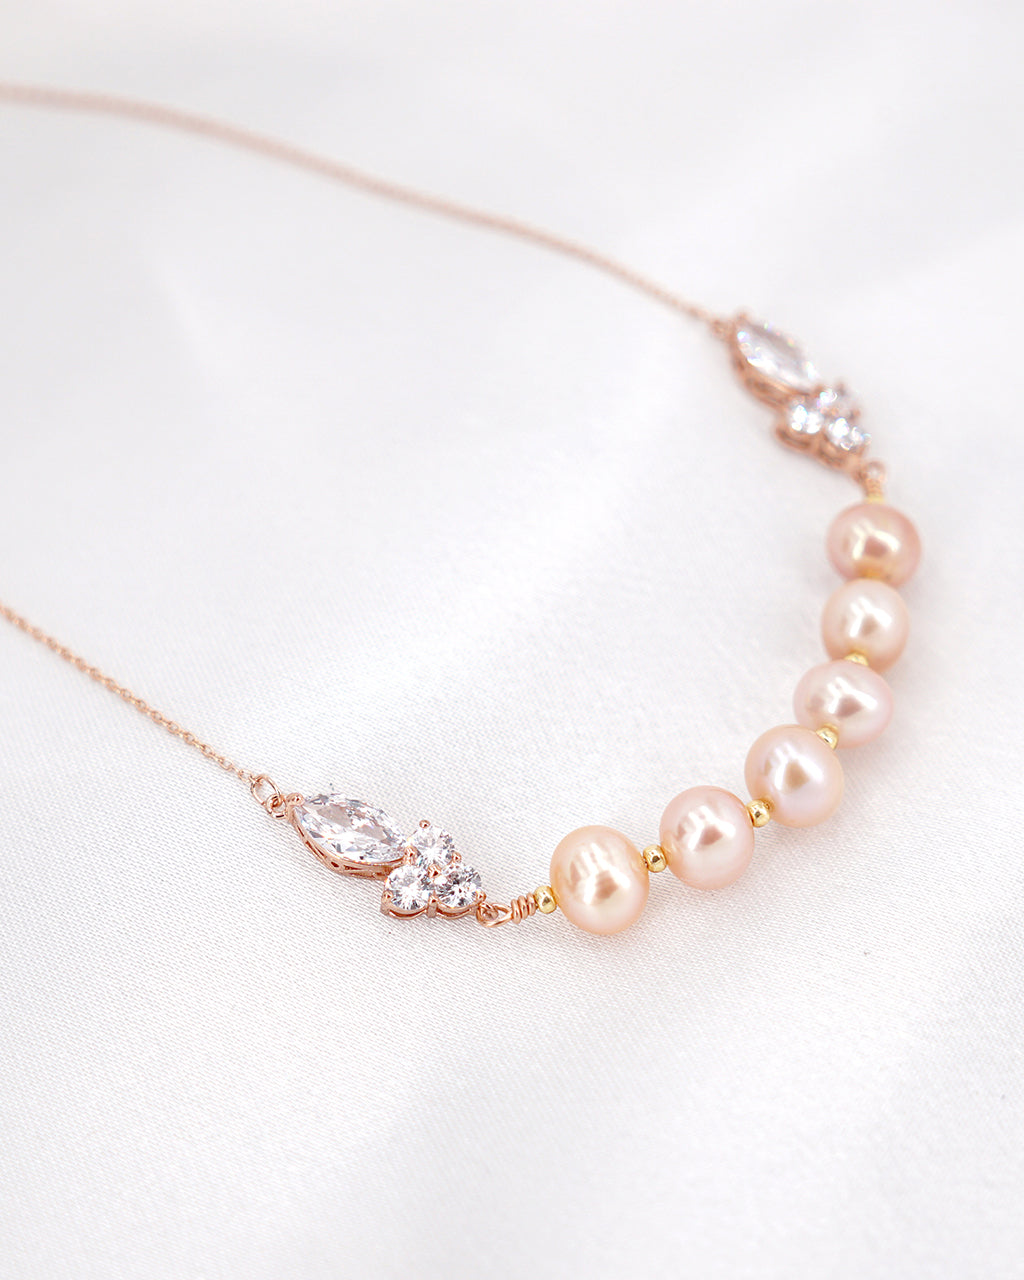 Freshwater Pearl Royal Necklace - Wedding Bridal Jewelry for Brides and Bridesmaids | Singapore